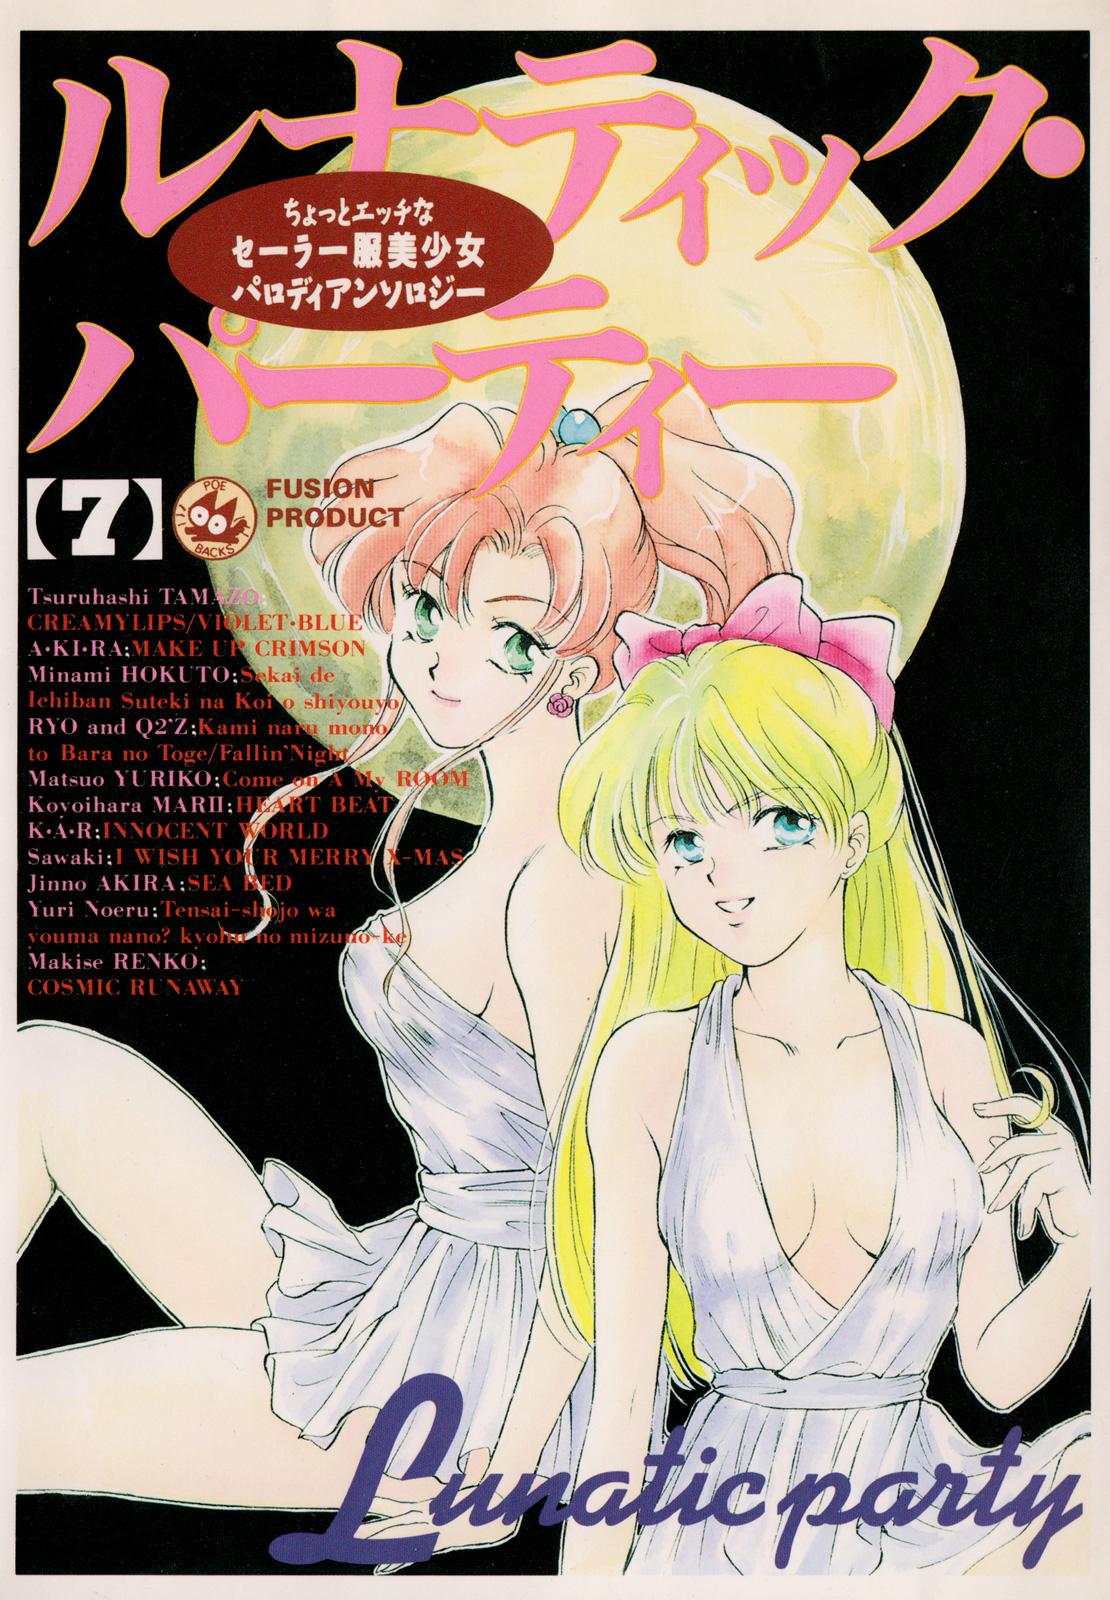 Solo Girl Lunatic Party 7 - Sailor moon Pattaya - Page 1